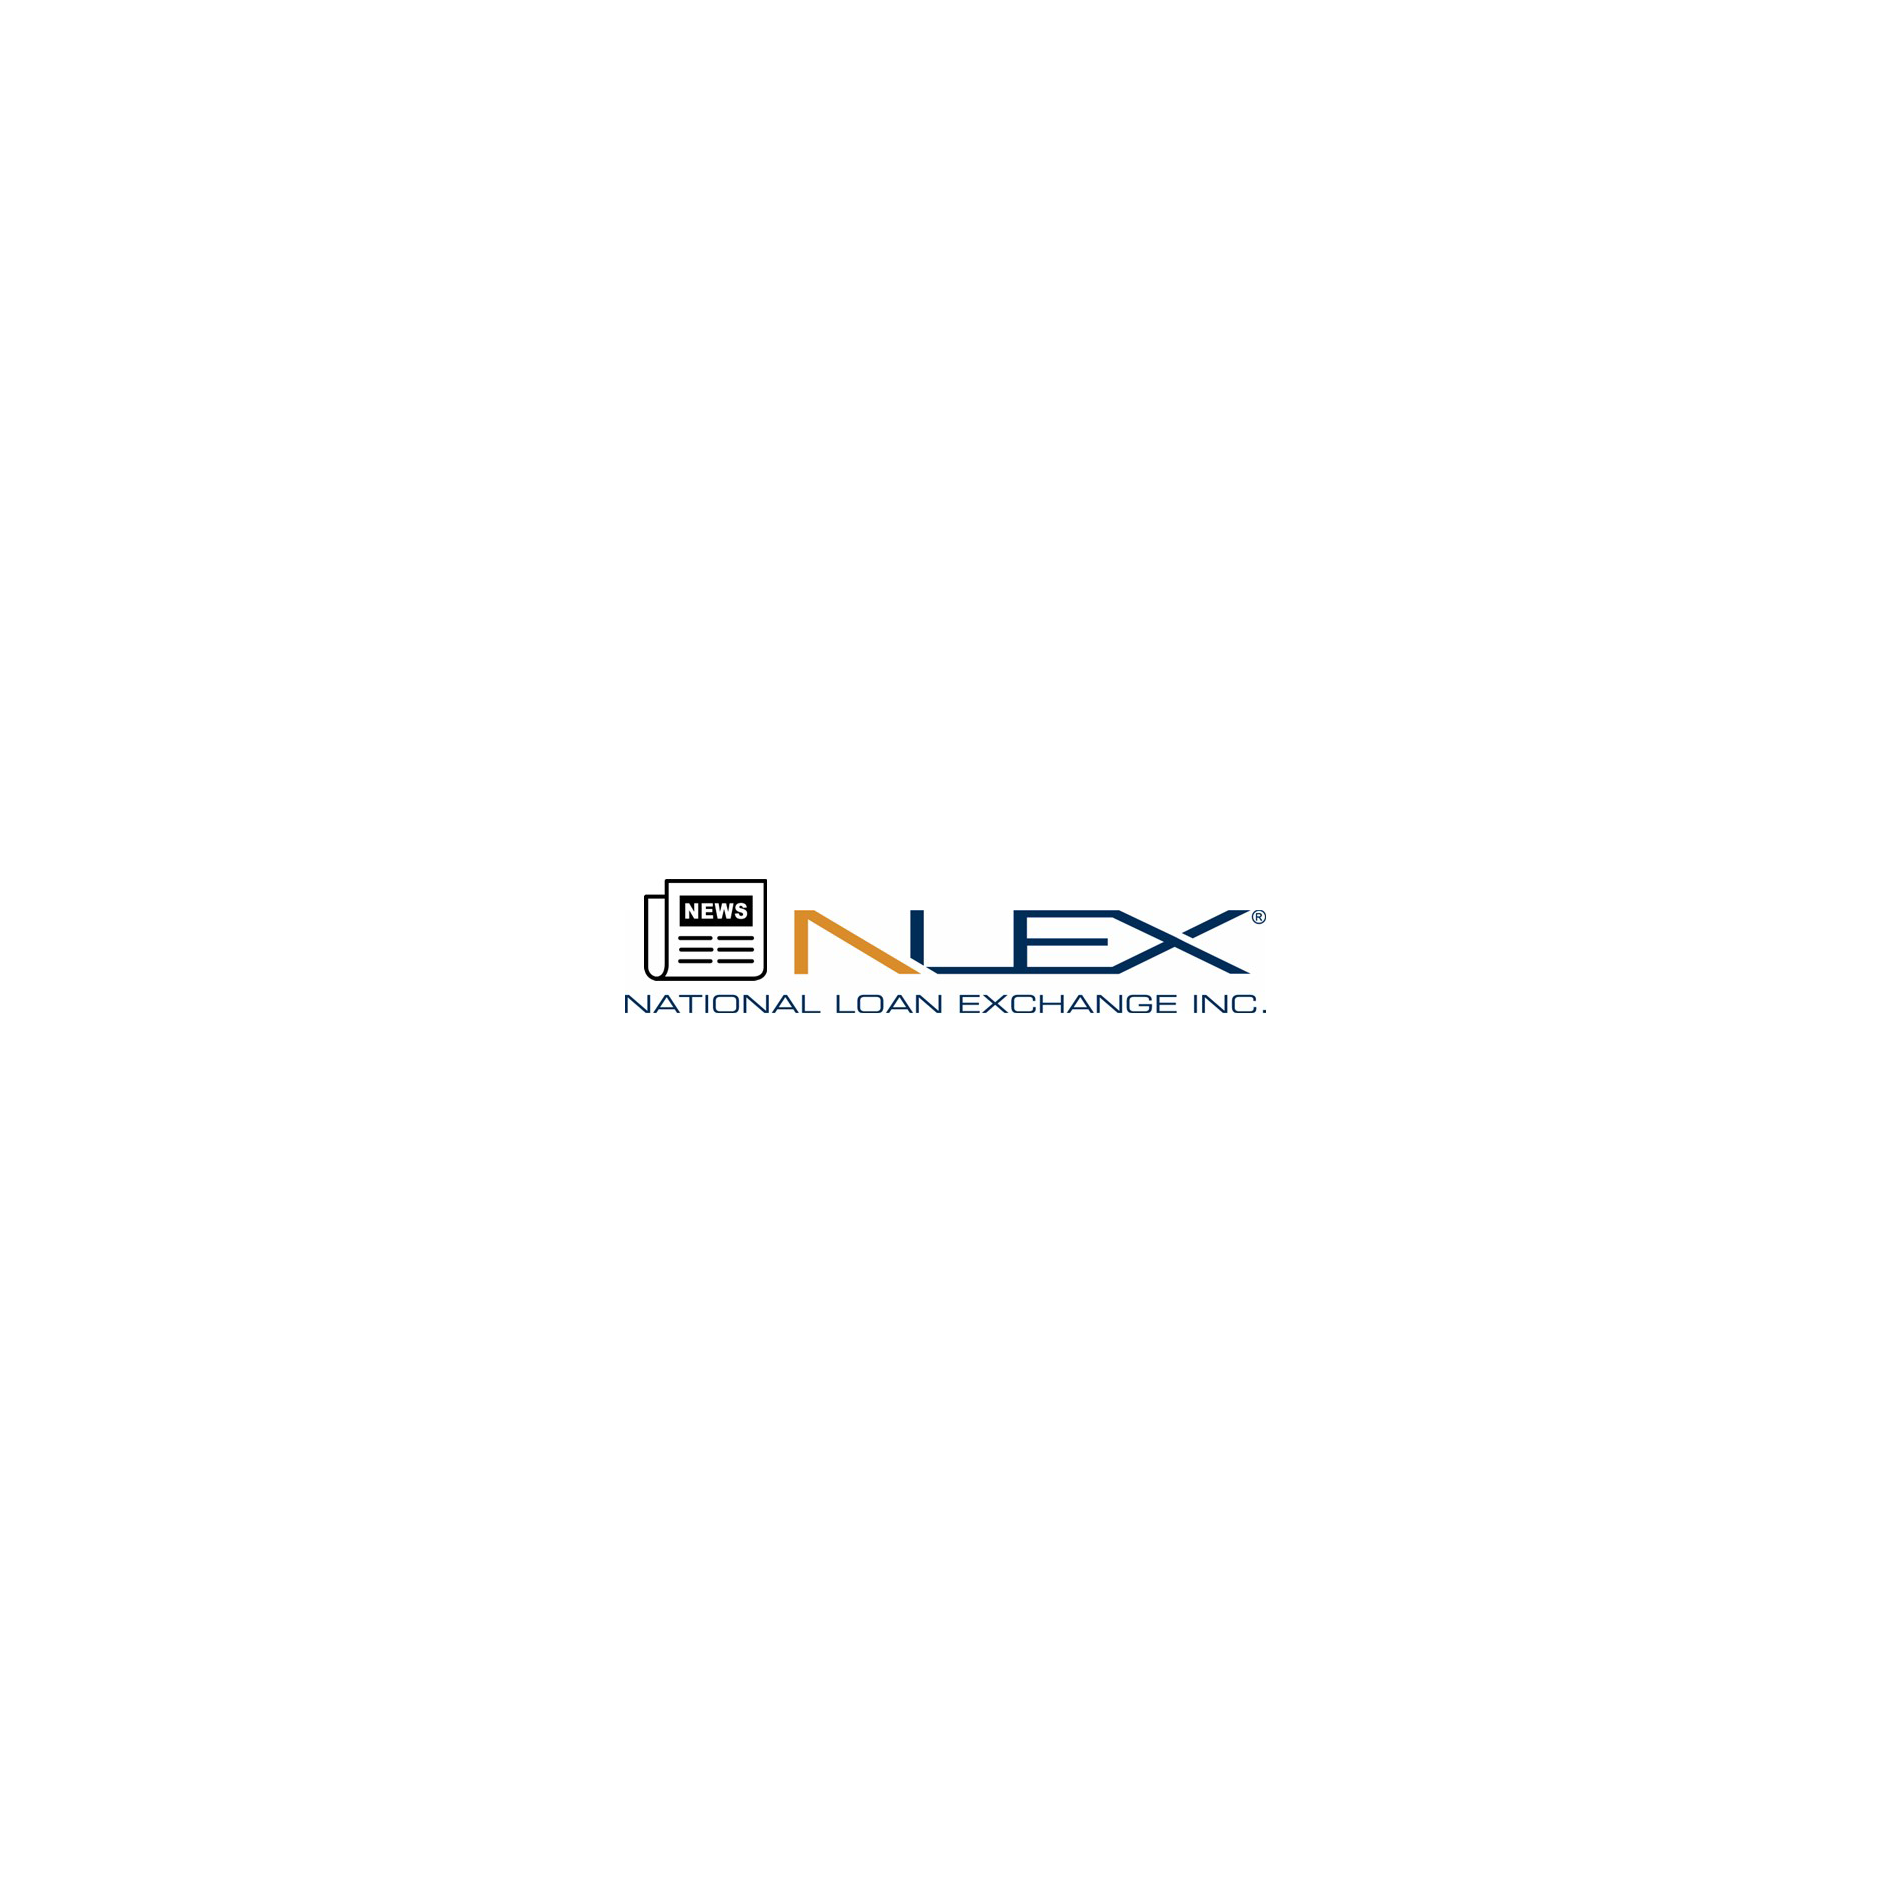 NLEX Appoints Ashley Arens-Yager as Assistant Vice President – Sale Operations